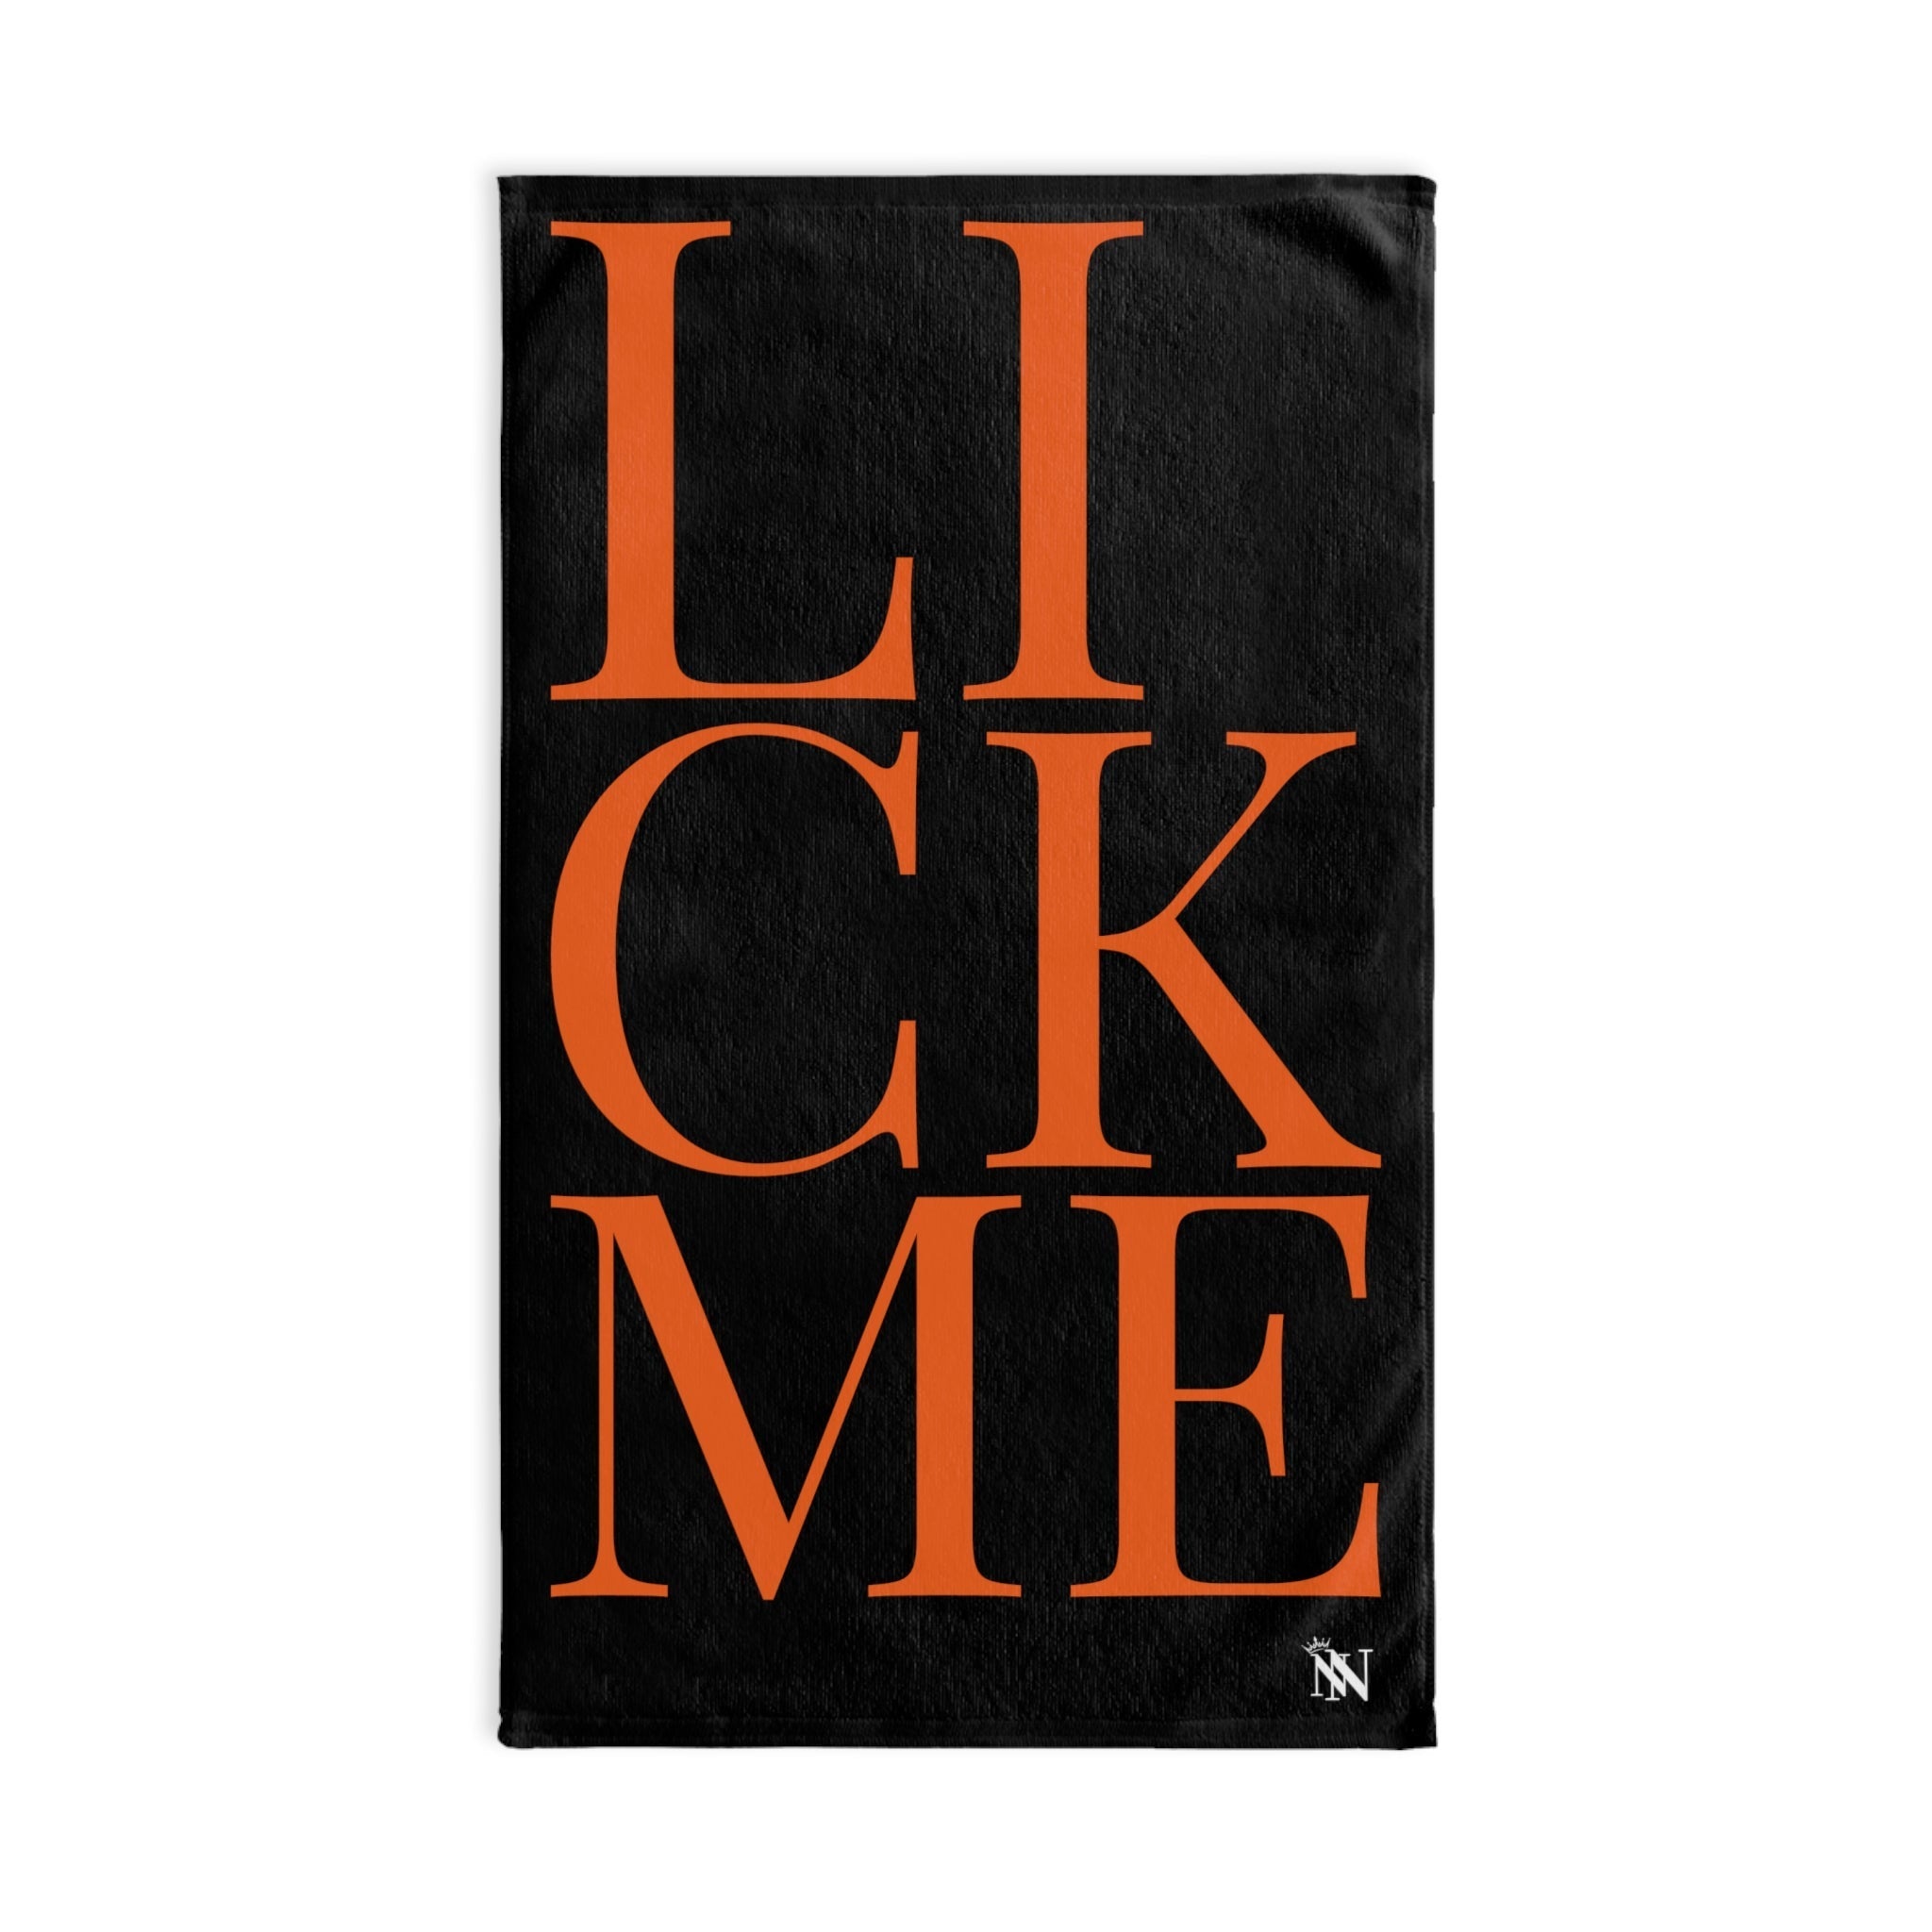 Lick Me Orange Black | Sexy Gifts for Boyfriend, Funny Towel Romantic Gift for Wedding Couple Fiance First Year 2nd Anniversary Valentines, Party Gag Gifts, Joke Humor Cloth for Husband Men BF NECTAR NAPKINS